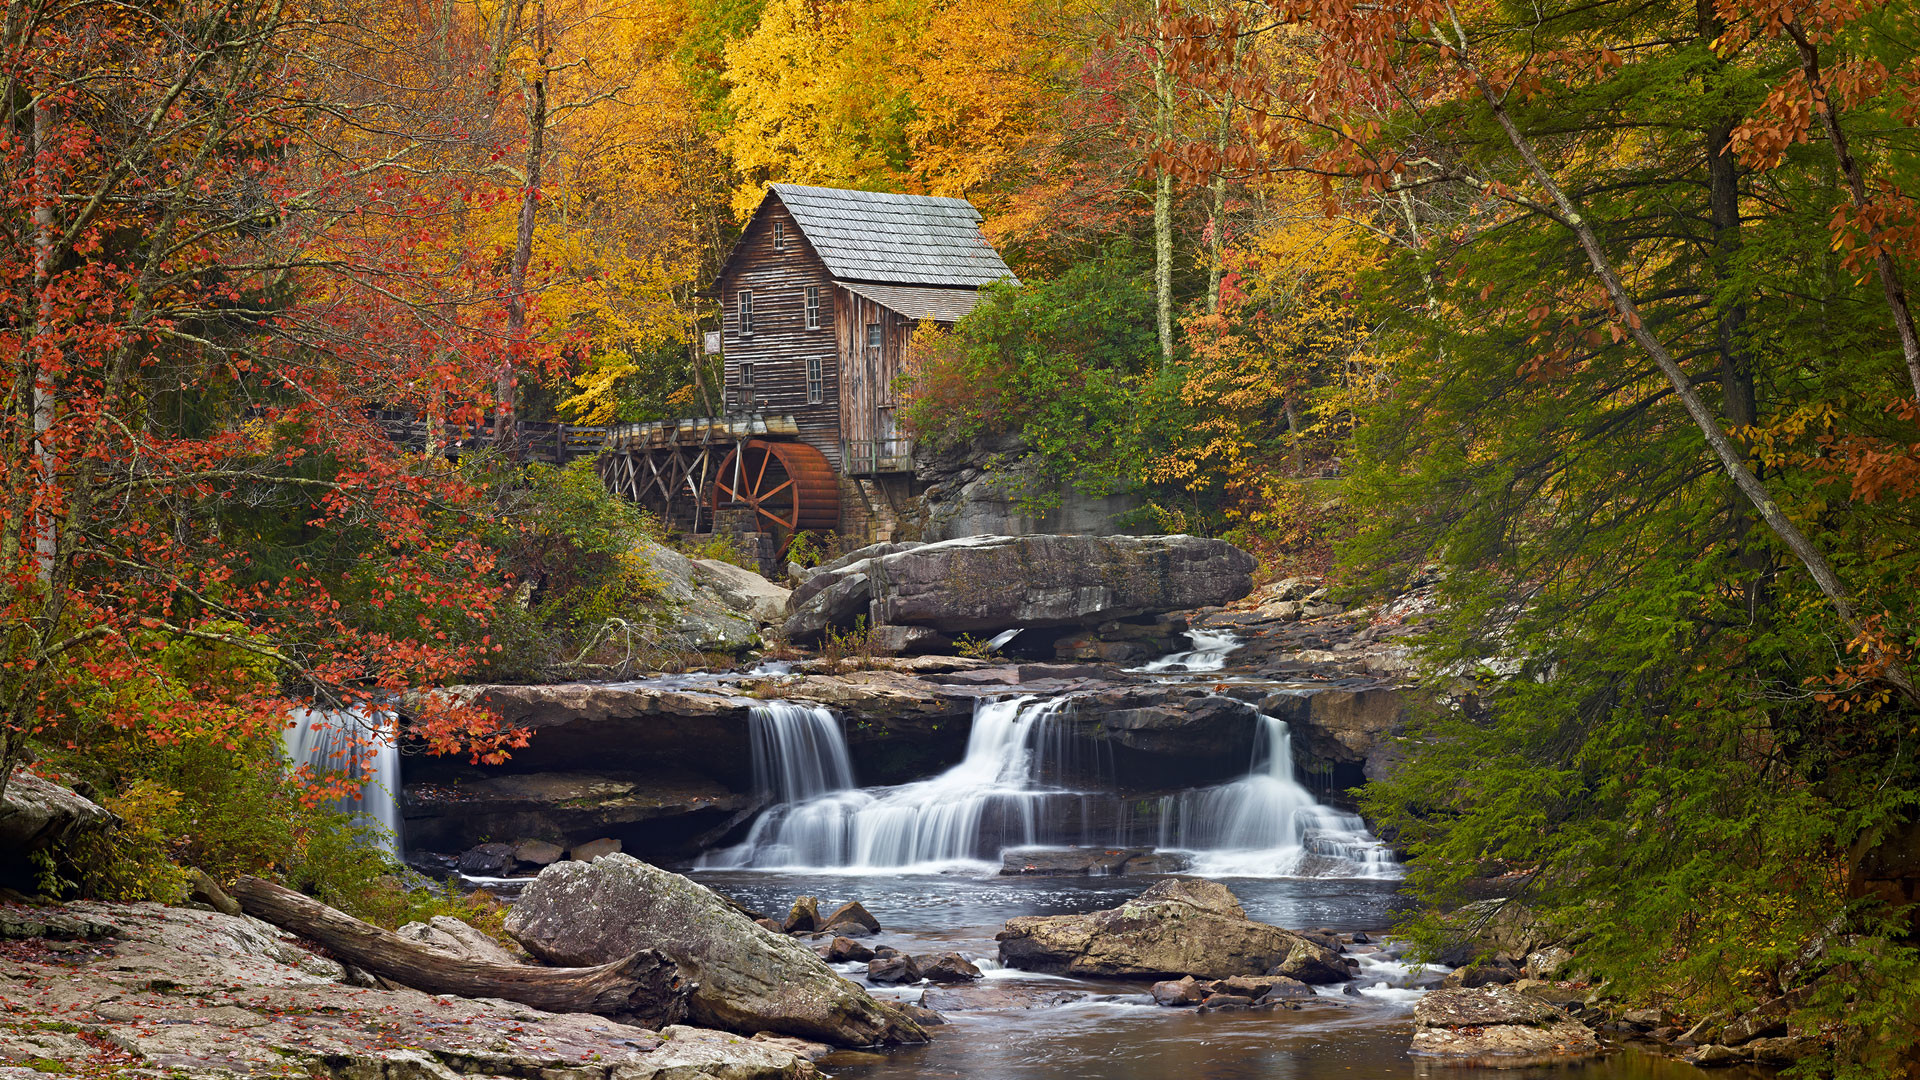 1920x1080 HD Landscape Wallpapers Babcock Mill West Virginia Other Nature Wallpapers  ,Babcock Mill,Babcock Mill West Virginia,West Virginia,West Virginia  picturesque.